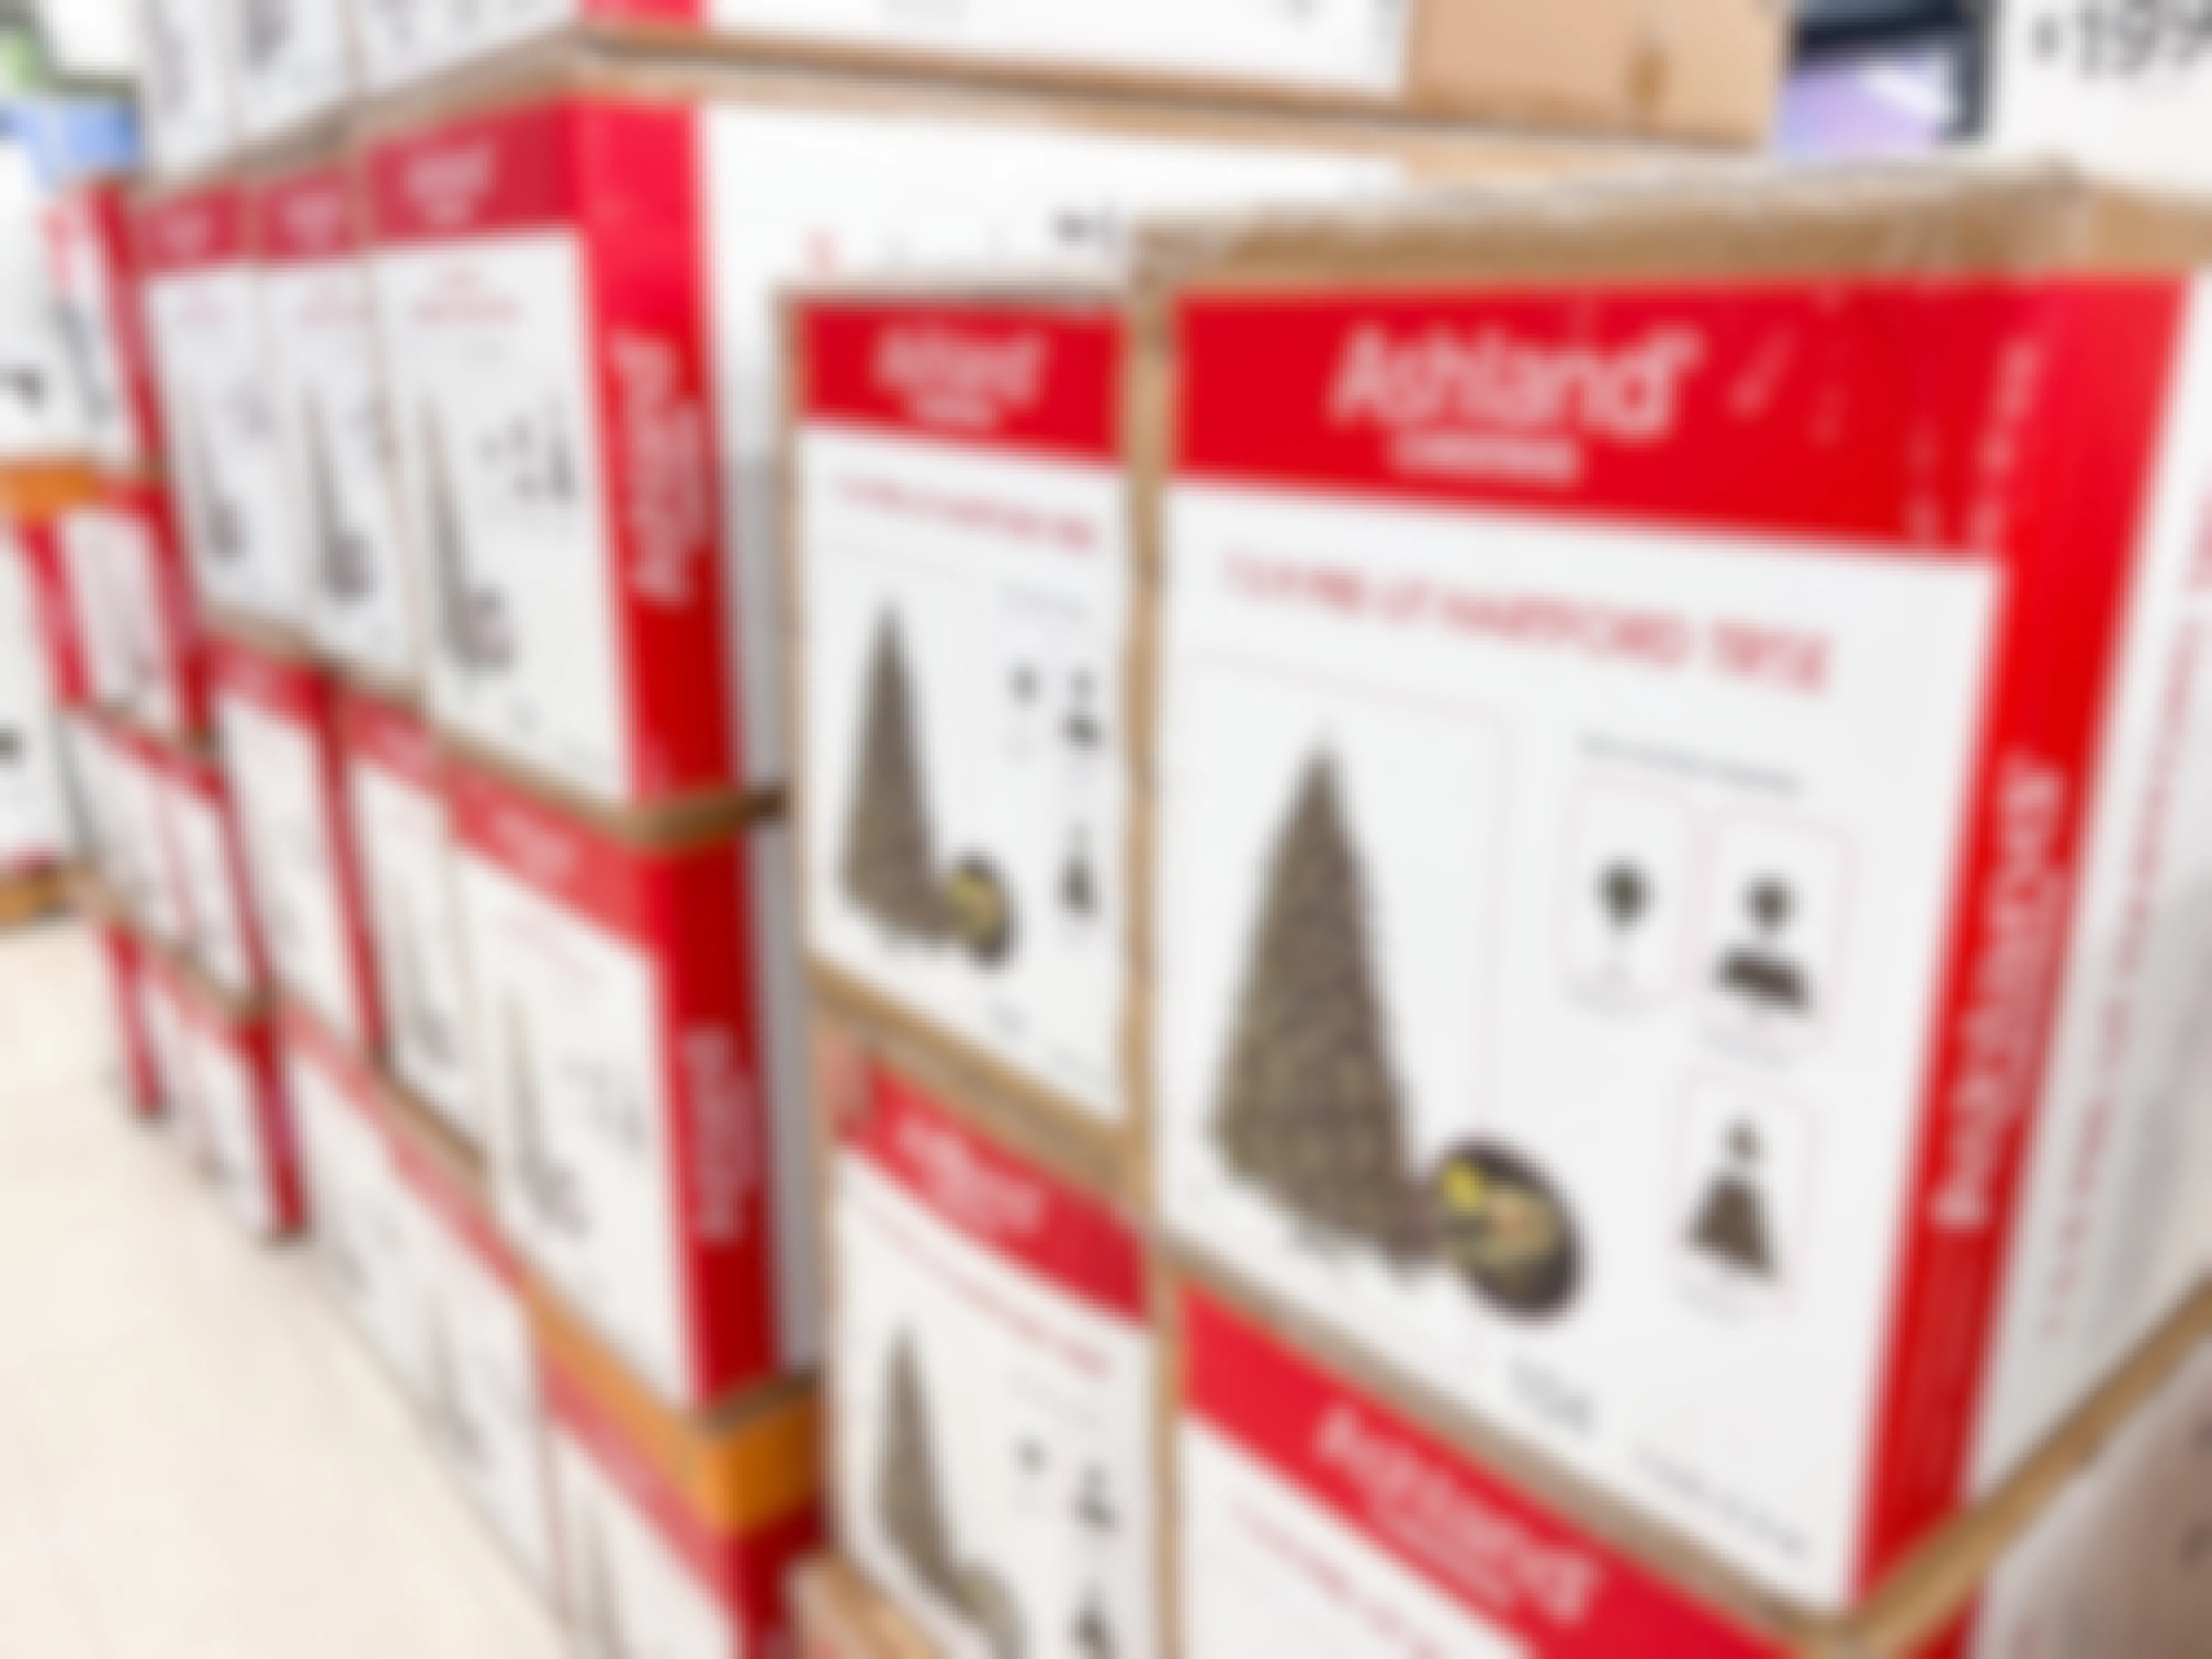 Artifical Christmas trees for sale at Michaels